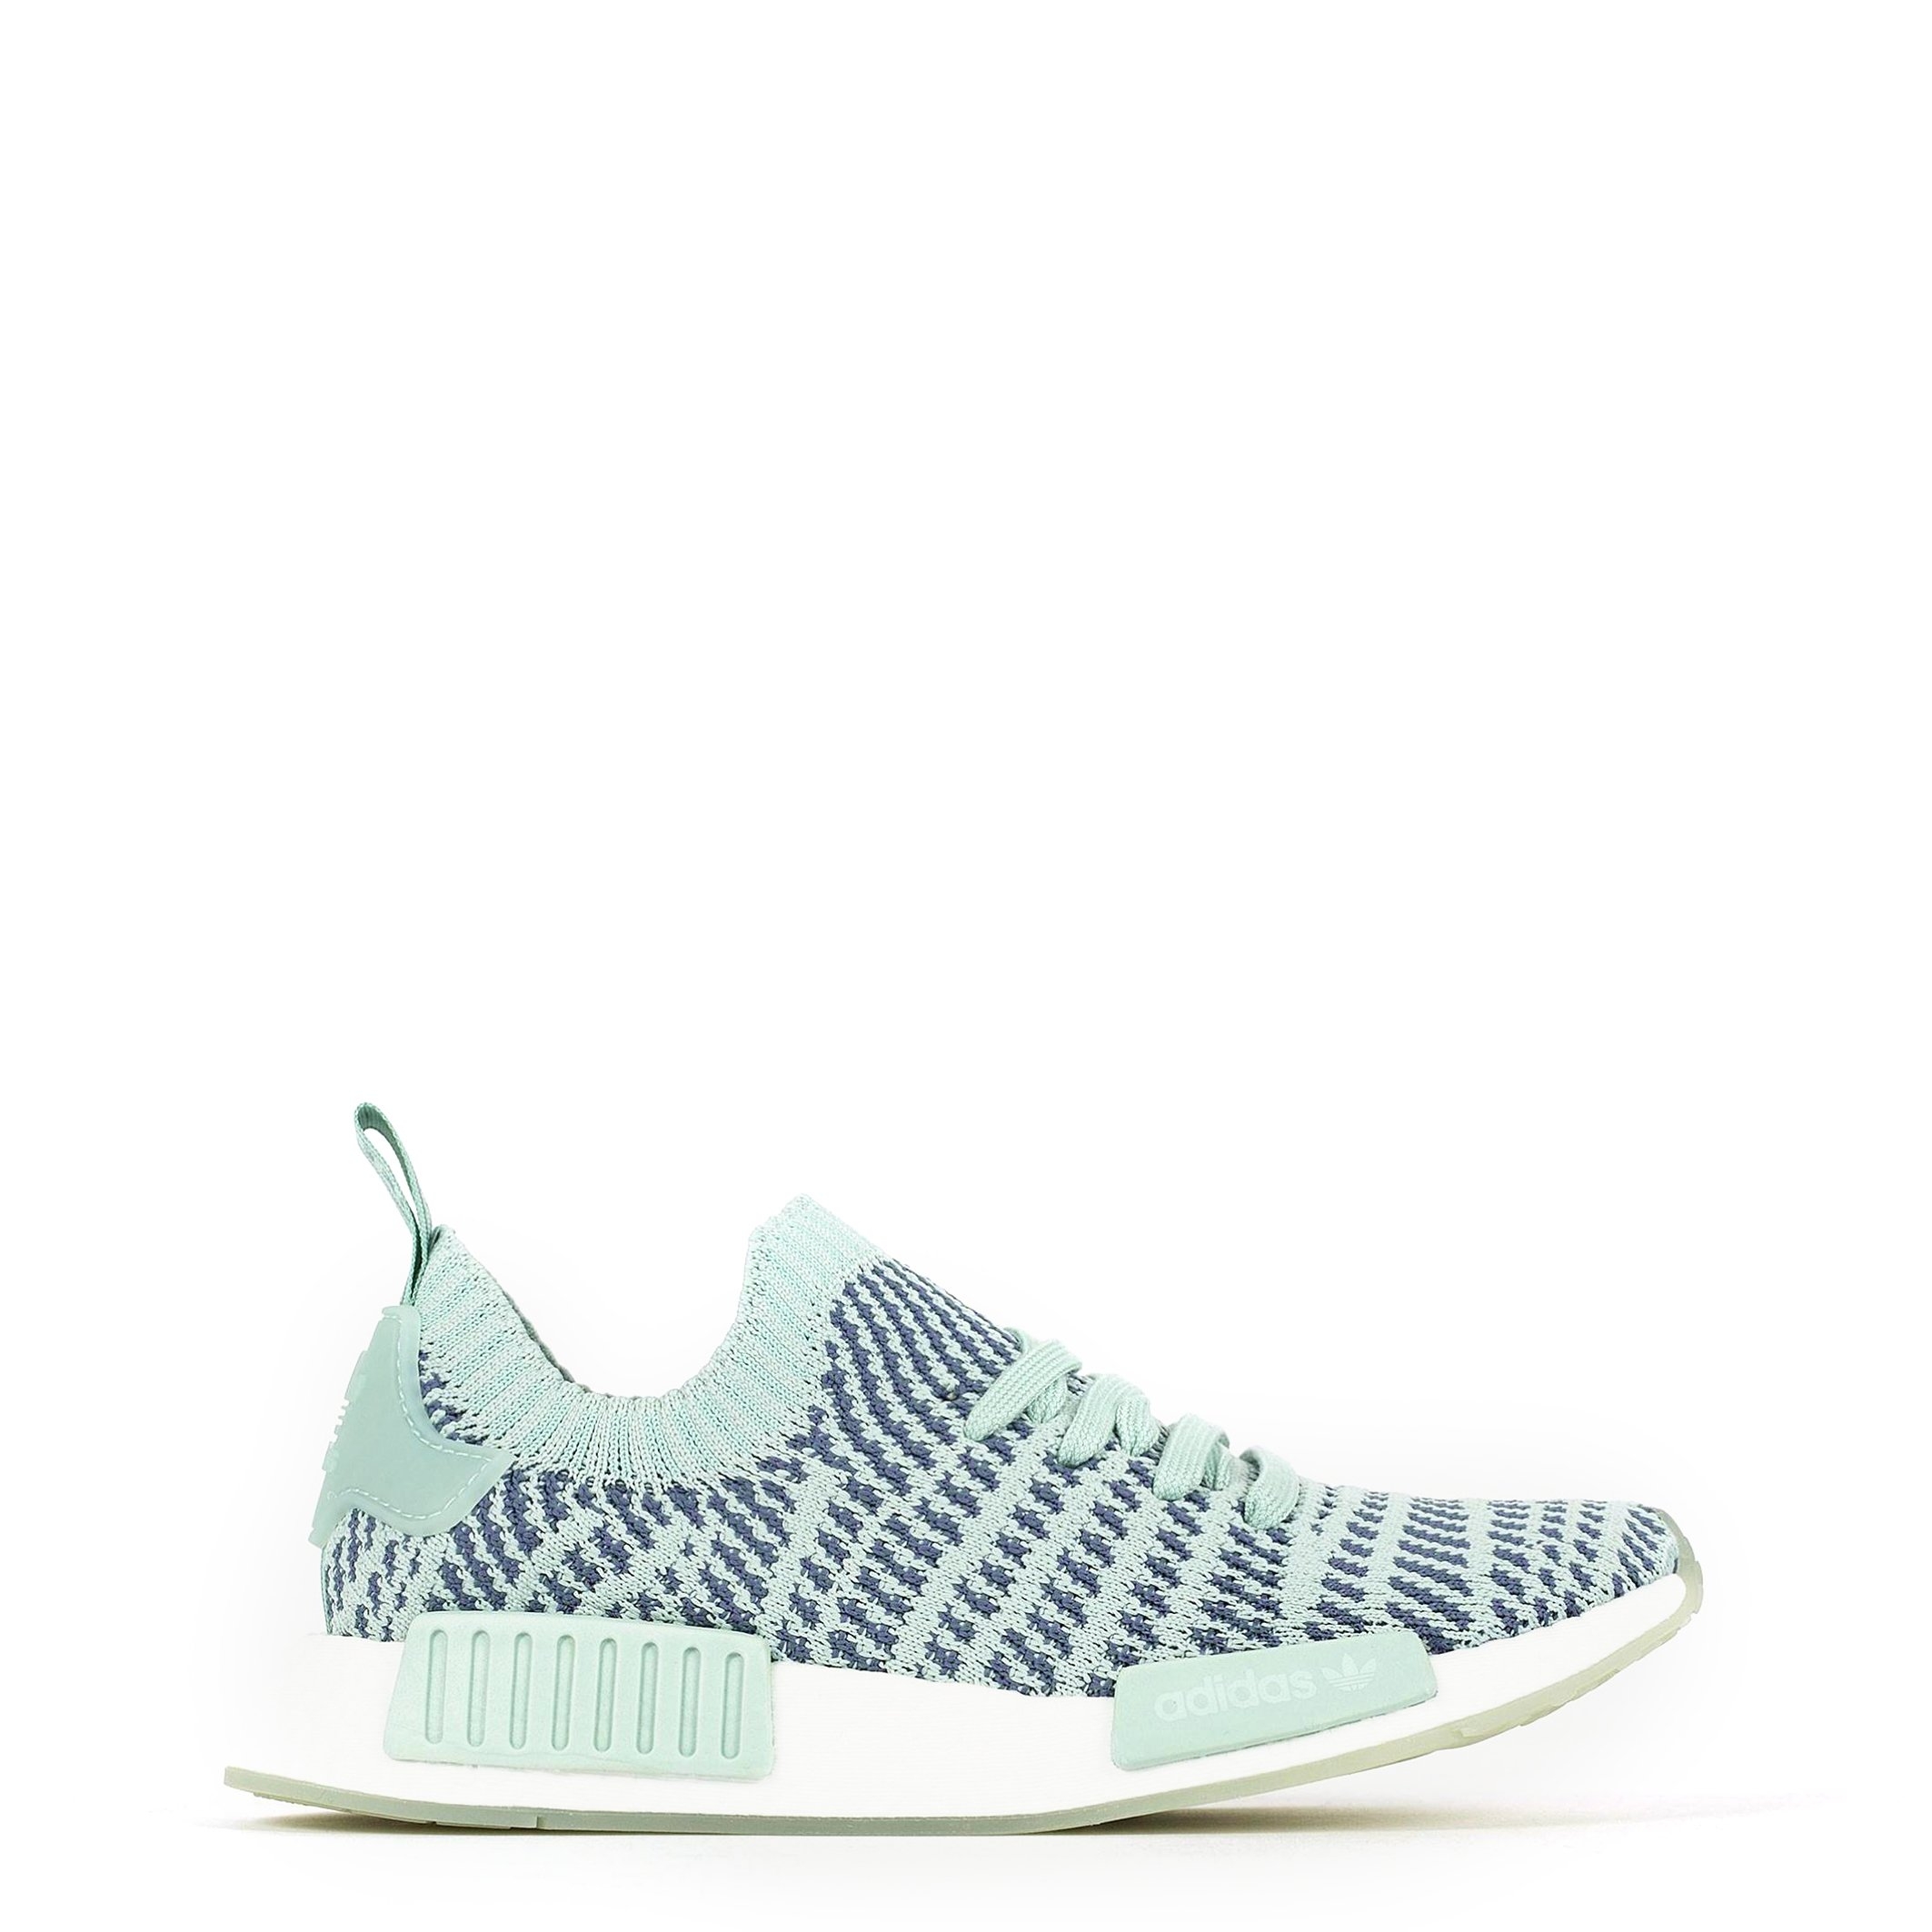 Adidas – NMD-R1_STLT – Shoes Sneakers – Blue-1 / Uk 6.5 – Love Your Fashion